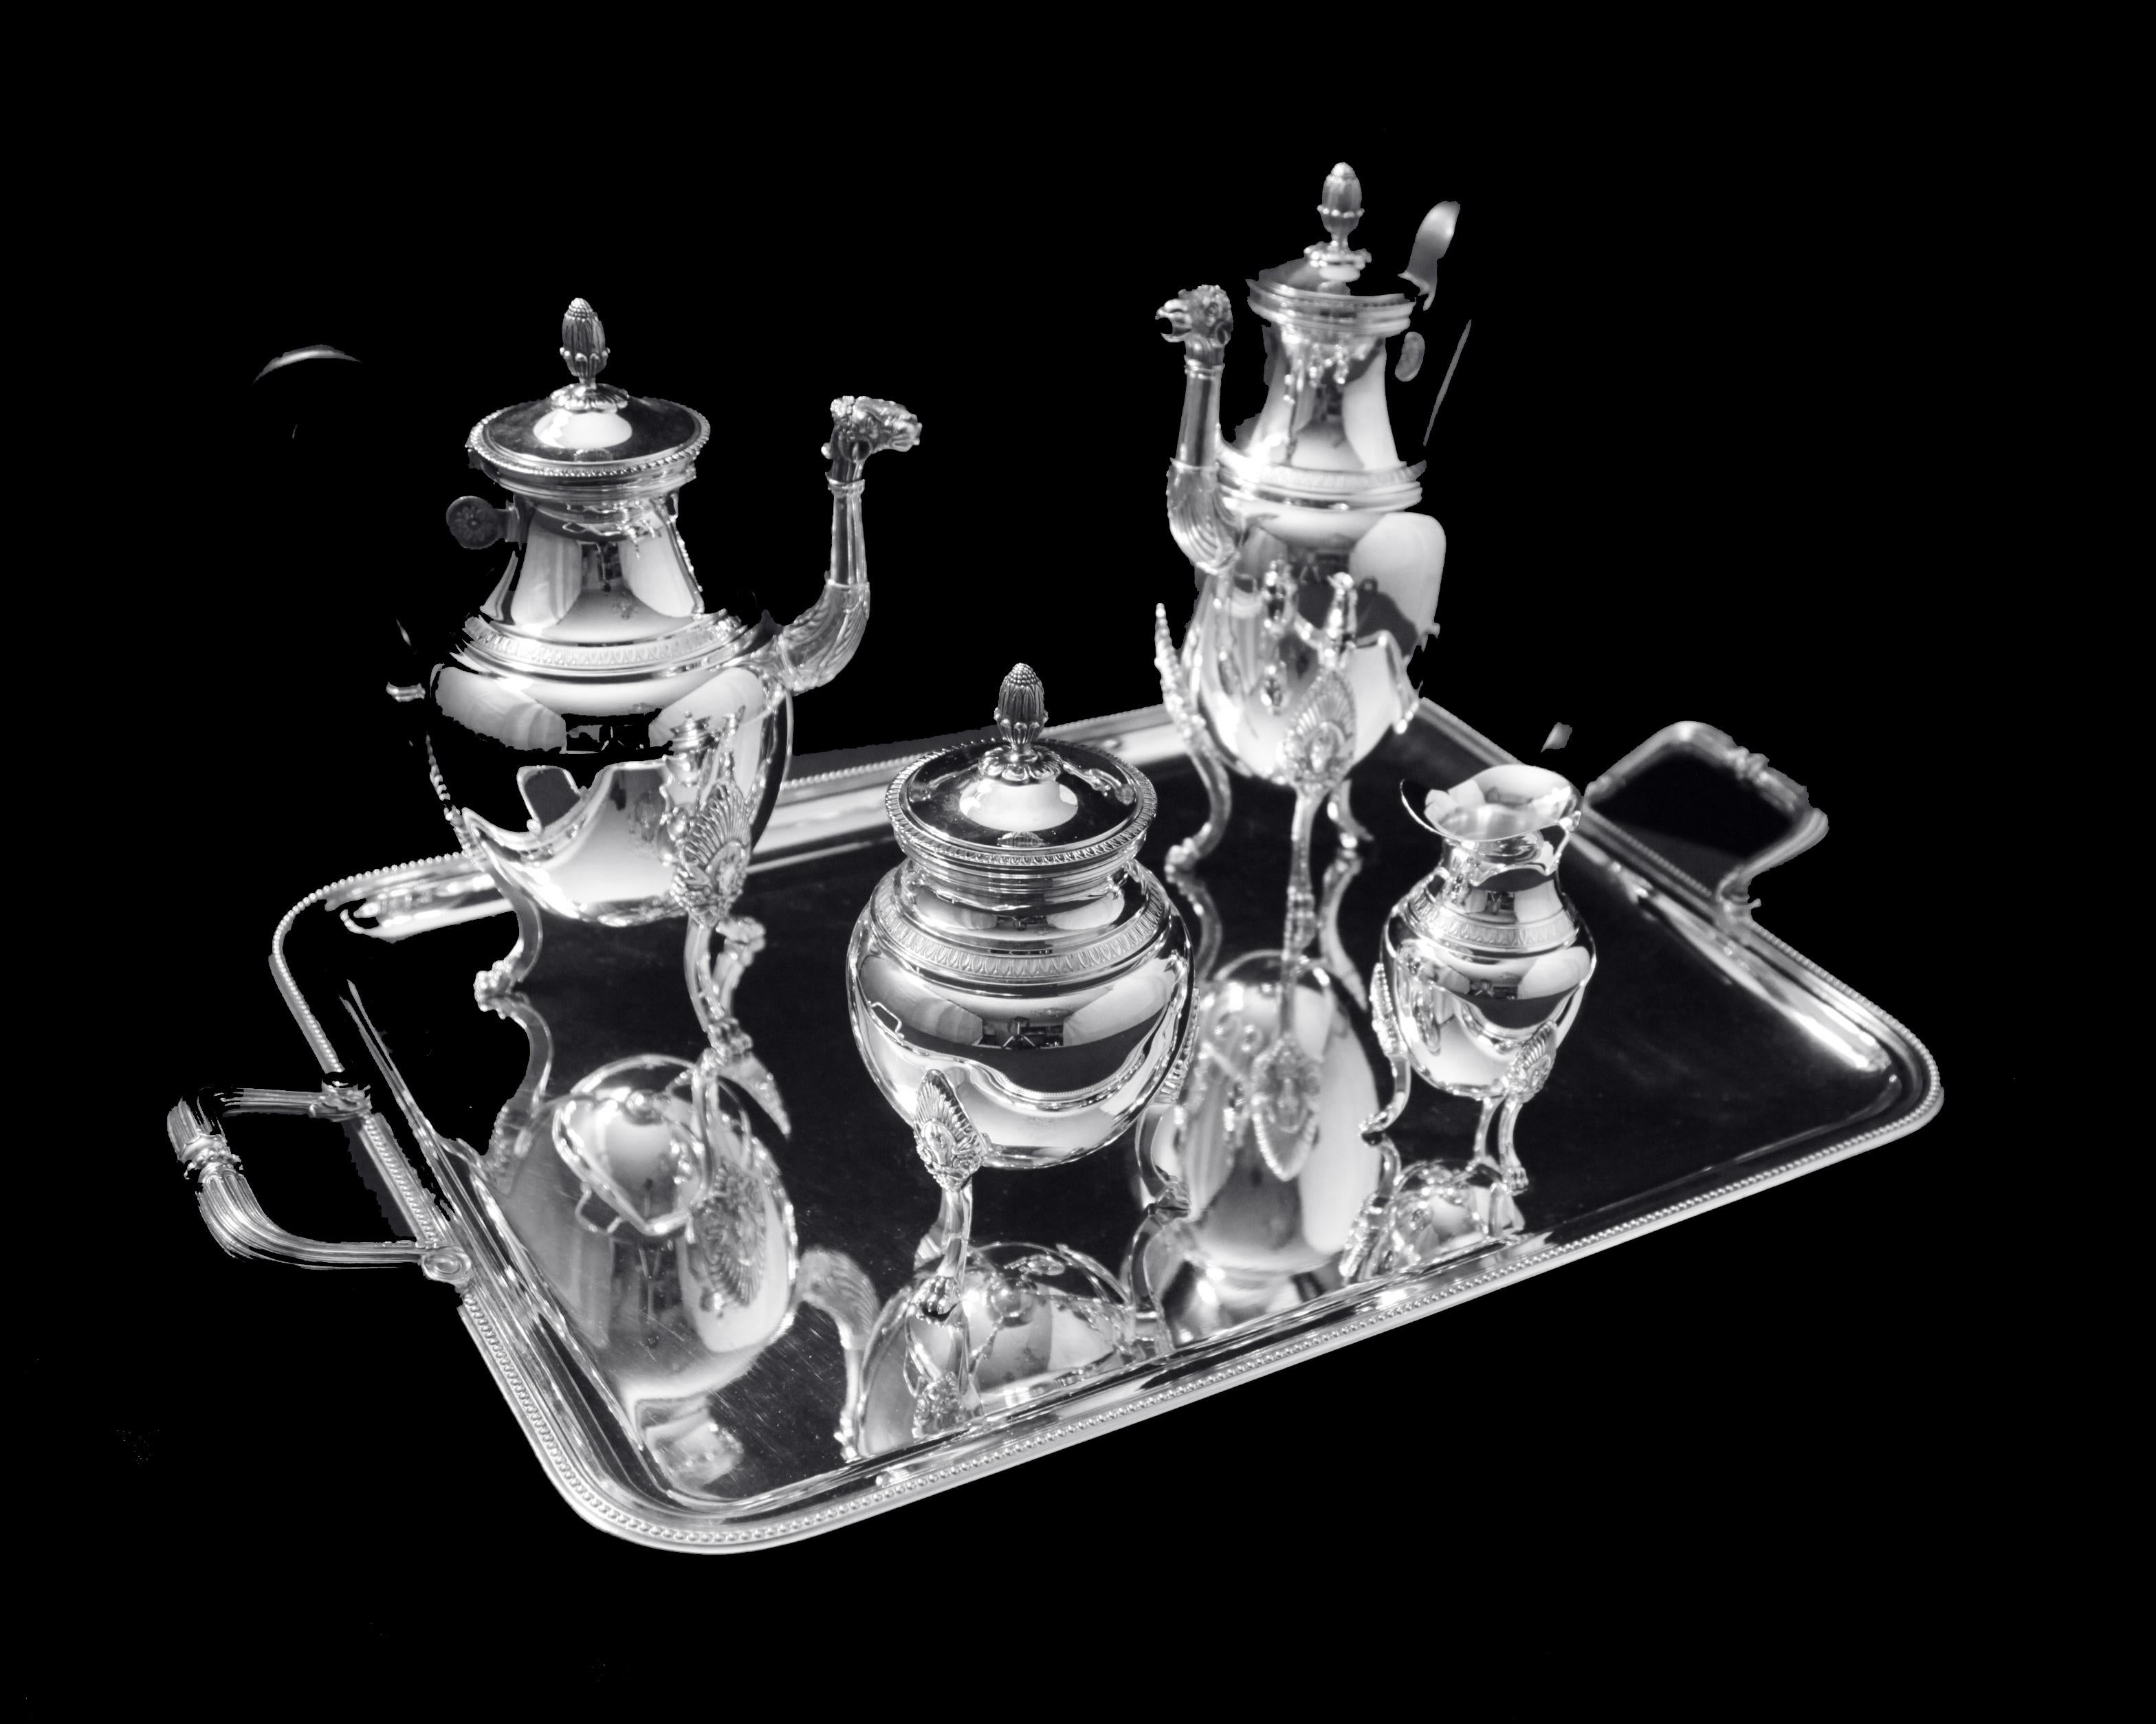 Direct from Paris, a magnificent 5-piece French antique Empire style silver-plate tea set by France’s premier silversmith “Christofle” – Silversmith to the King.  Each piece in this stunning set has been professionally refinished to like new